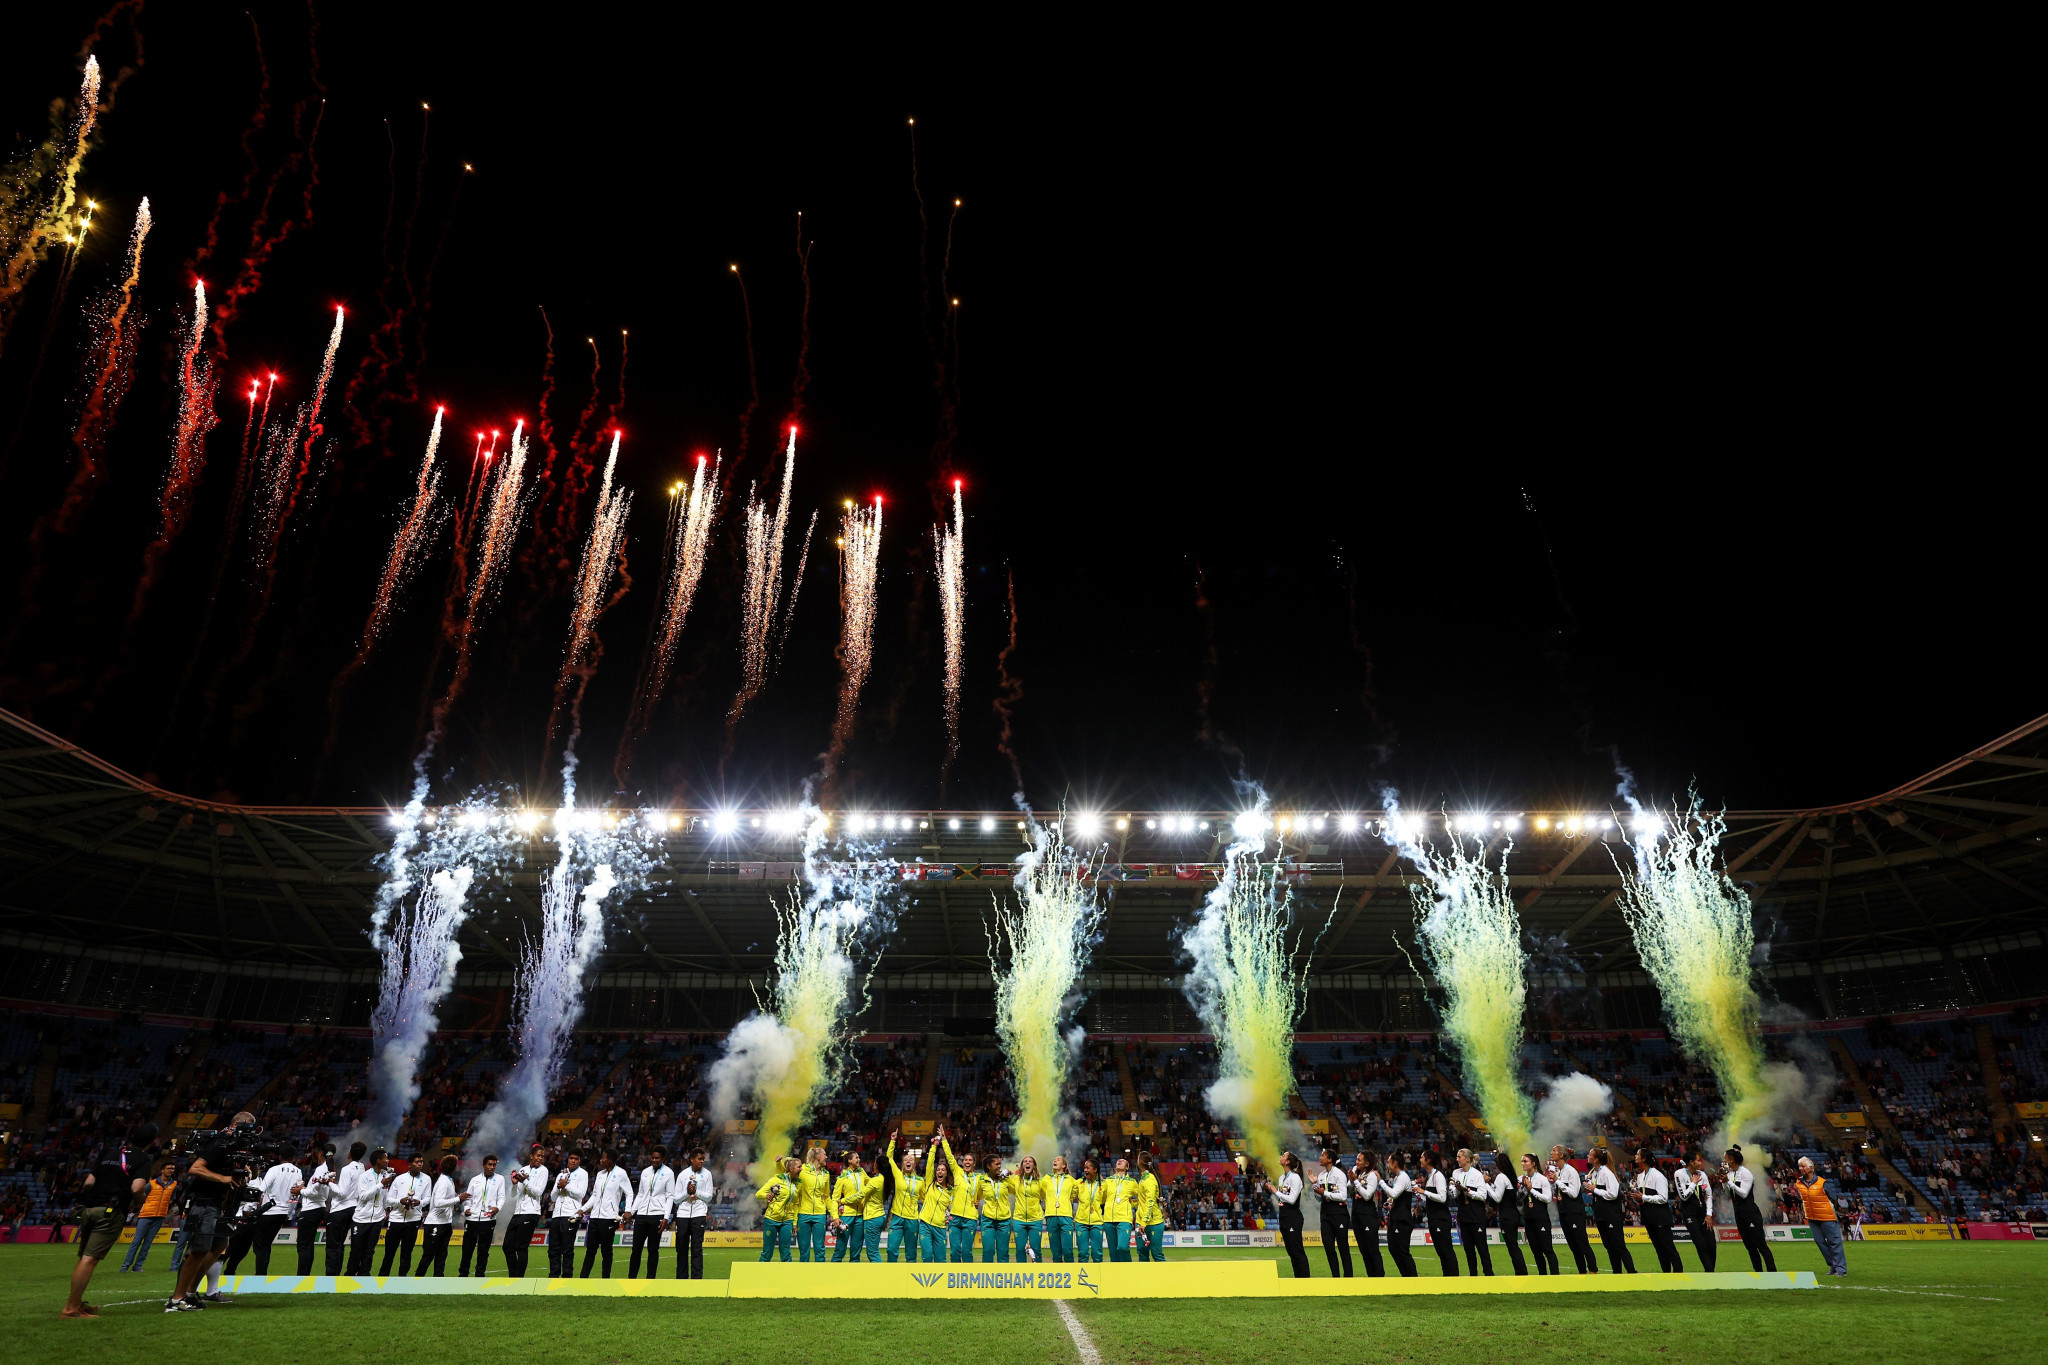 Fireworks helped create an electric atmosphere for the rugby sevens competitions at the Coventry Stadium ©Getty Images